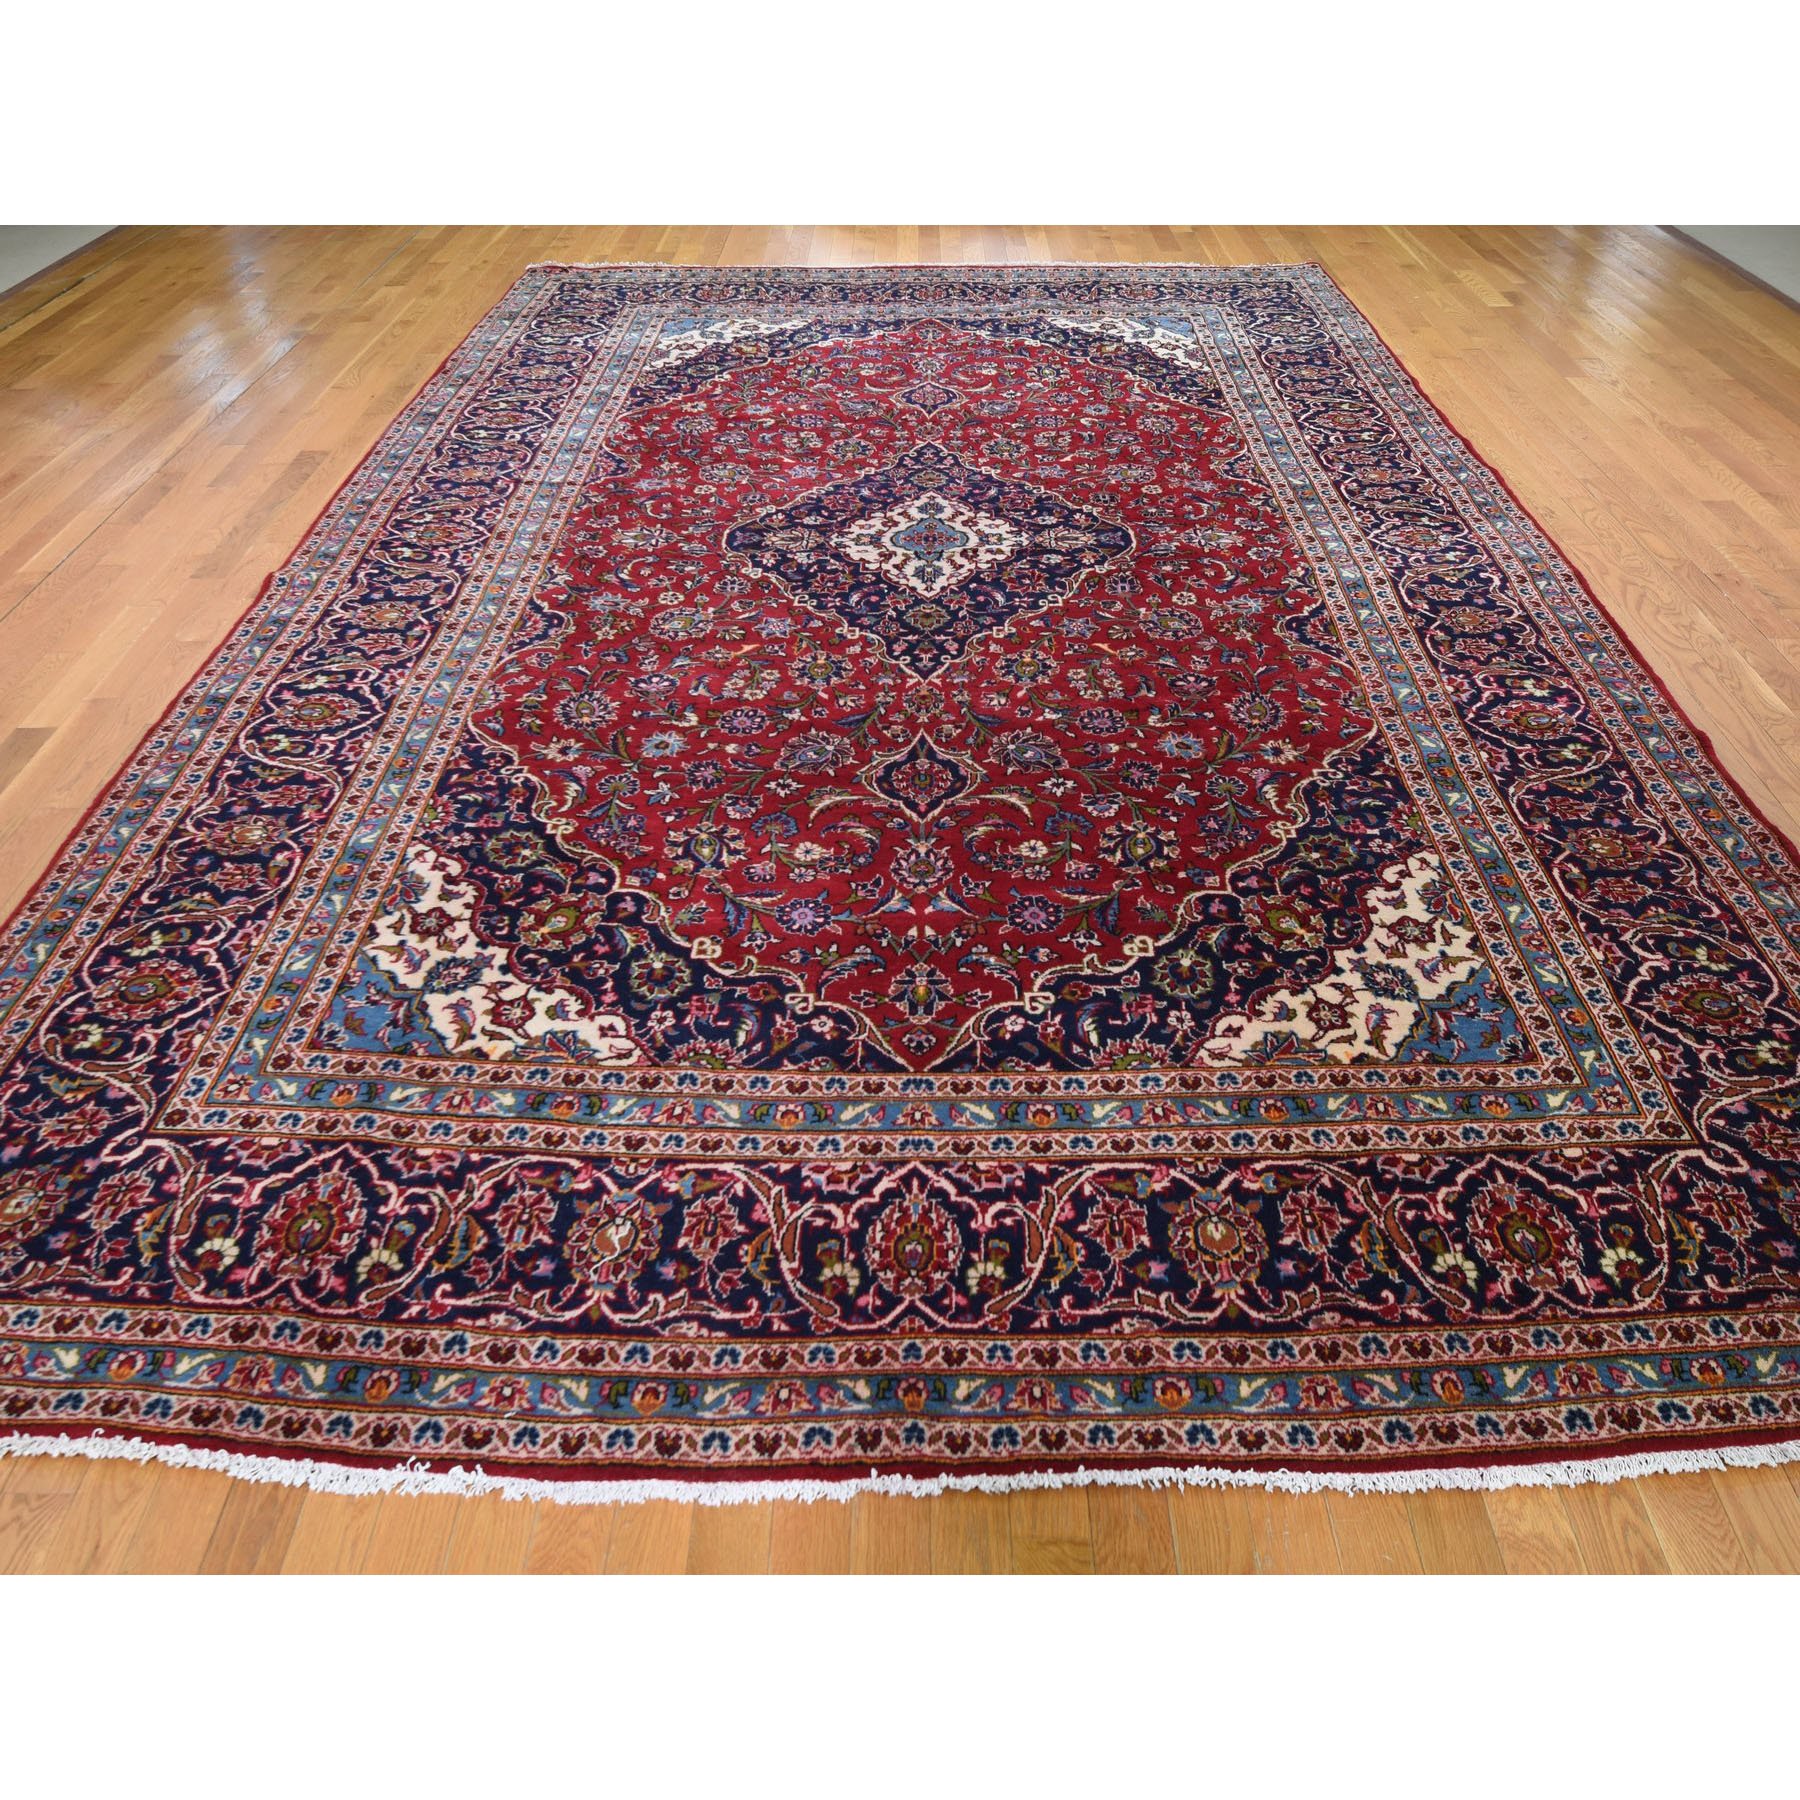 9-8 x14-4  Red Semi Antique Persian Kashan Full Pile Pure Wool Hand Knotted Oriental Rug 